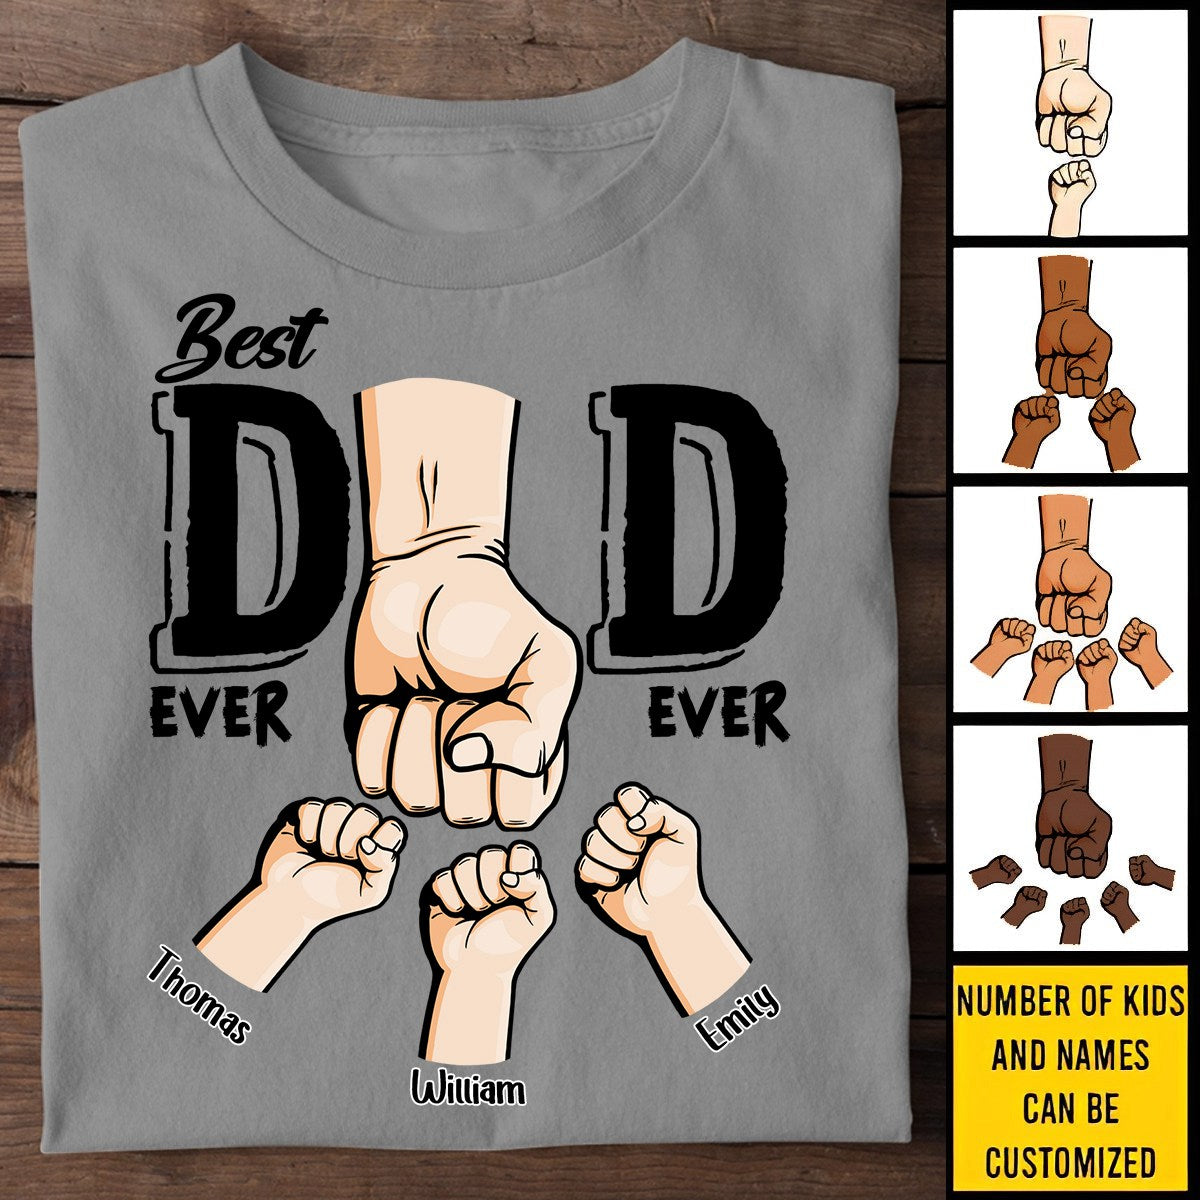 Best Dad Ever Ever - Family Personalized Custom Unisex T-shirt - Birthday Gift For Dad